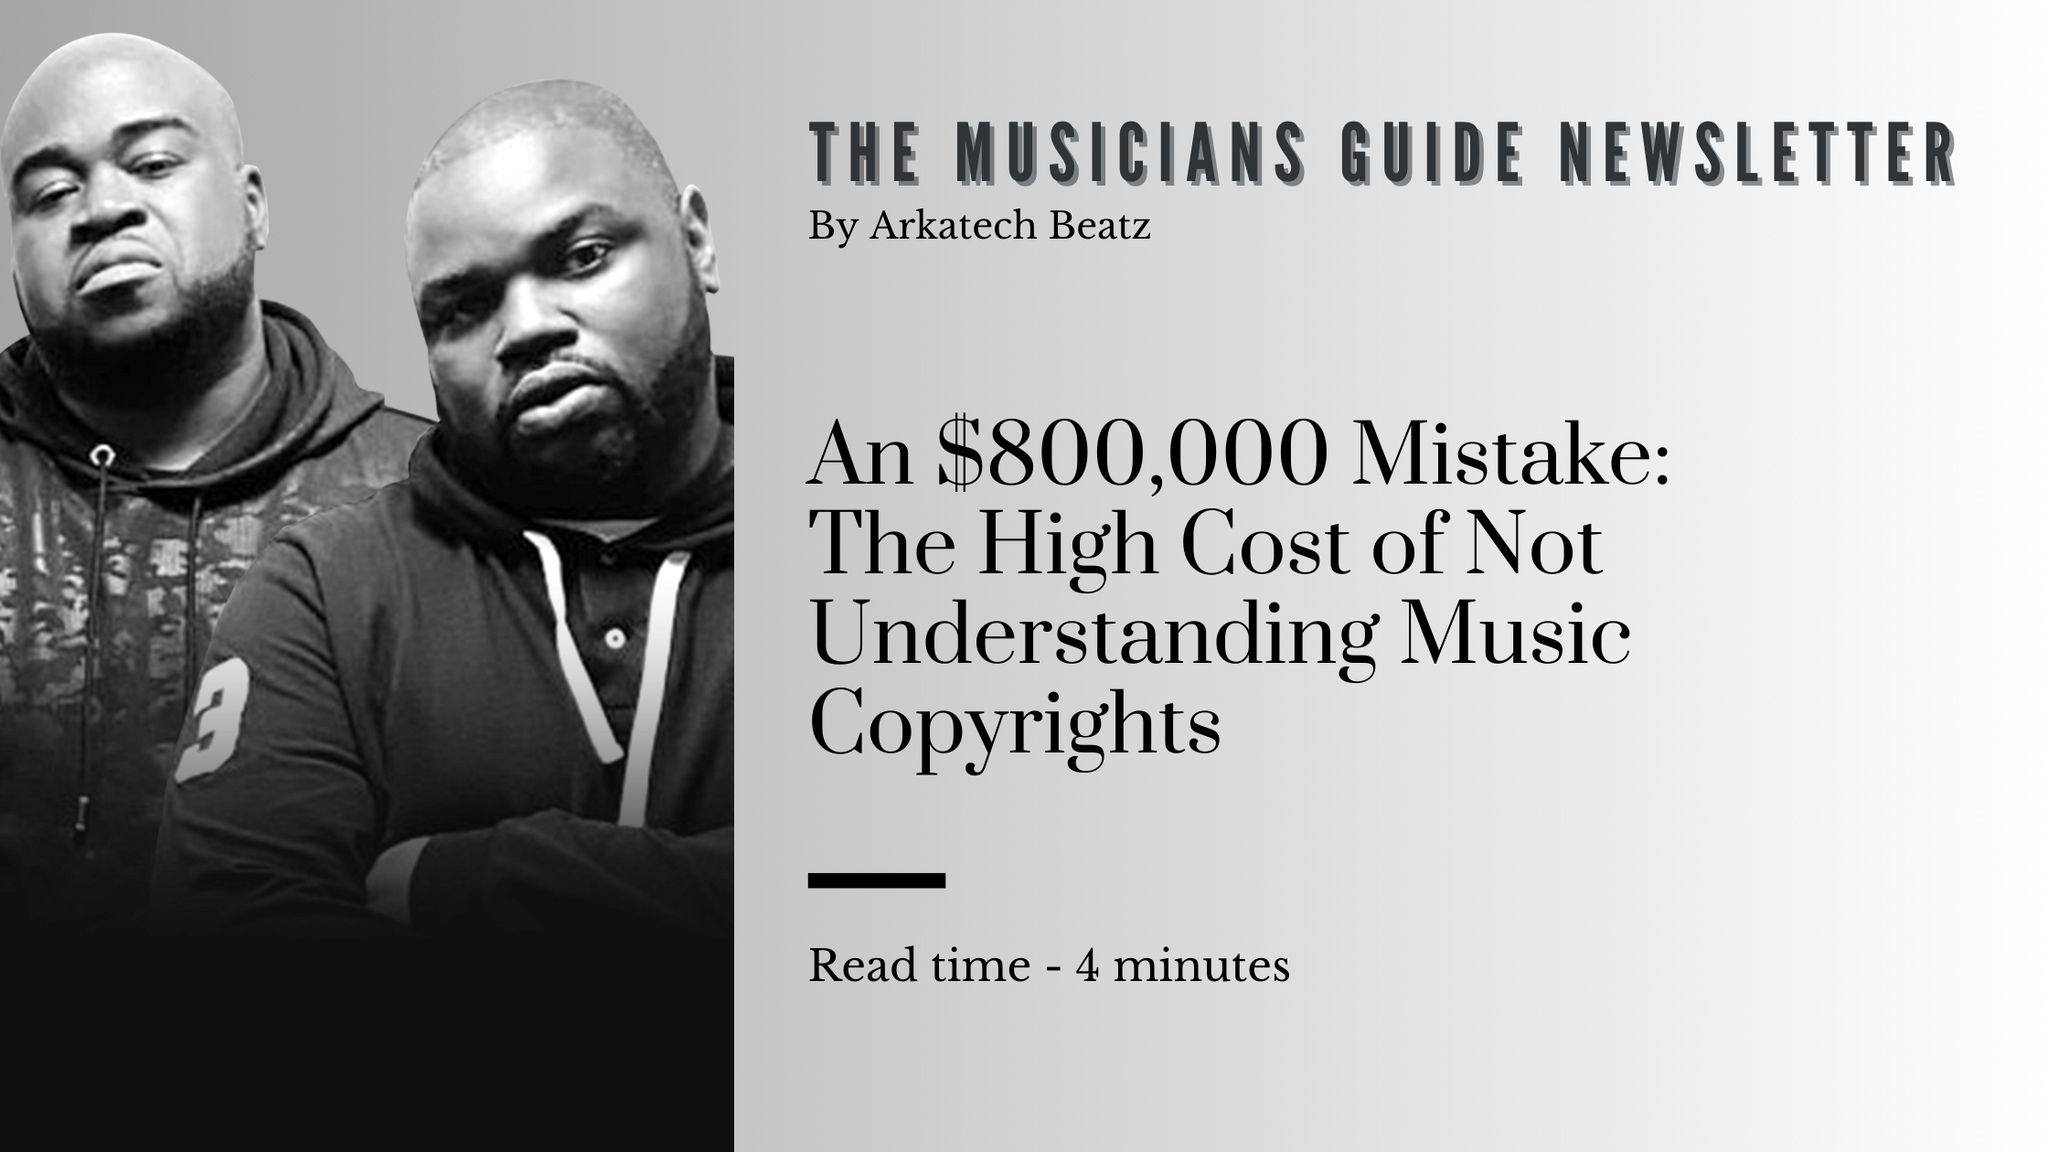 An $800,000 Mistake: The High Cost of Not Understanding Music Copyrights